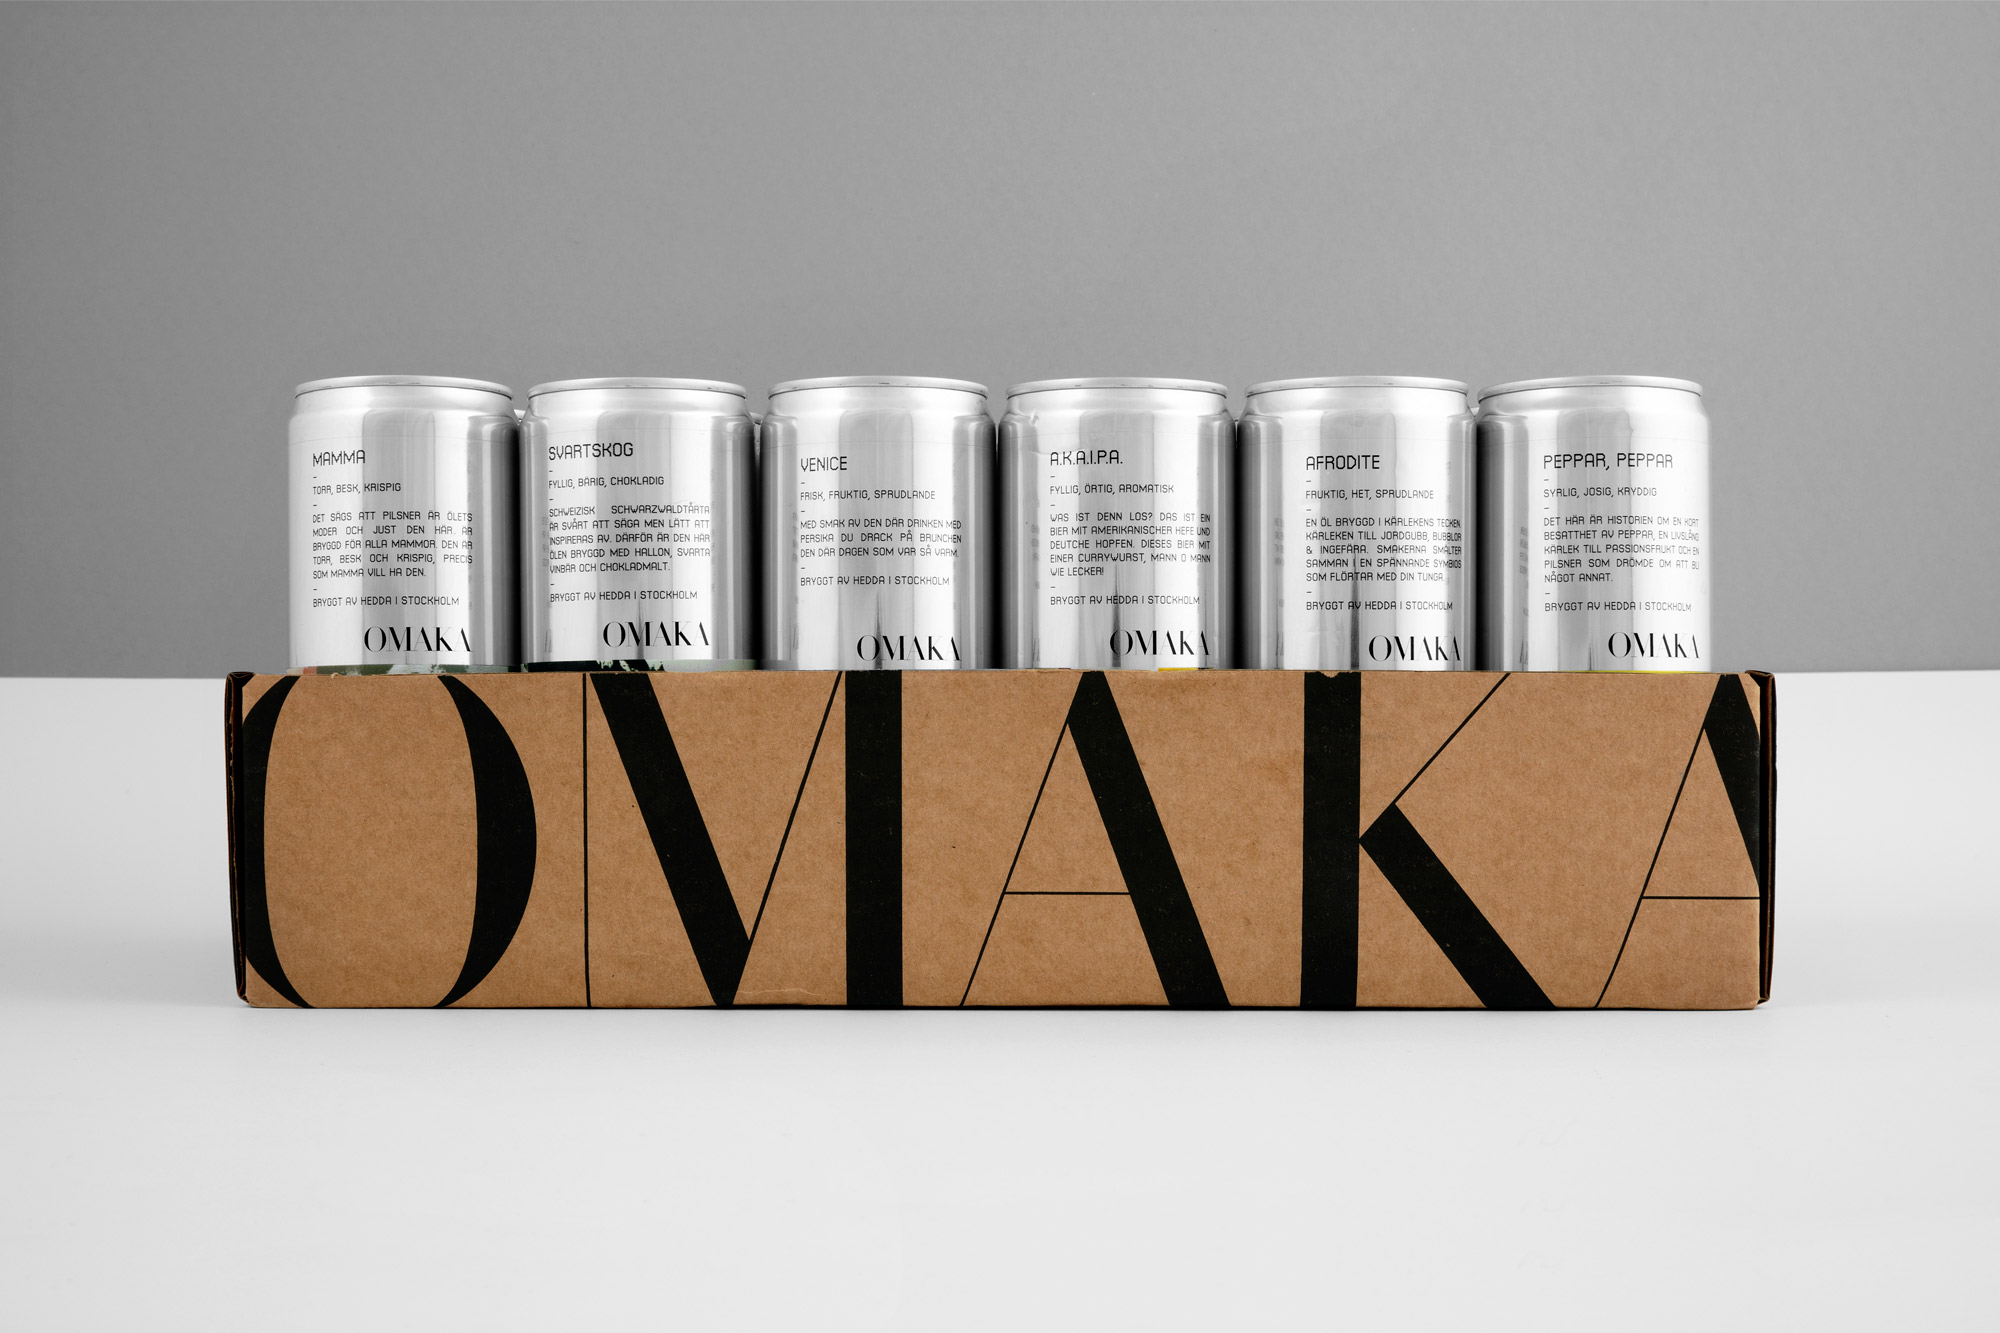 Logo and can packaging design for Swedish microbrewery Omaka by Stockholm Design Lab